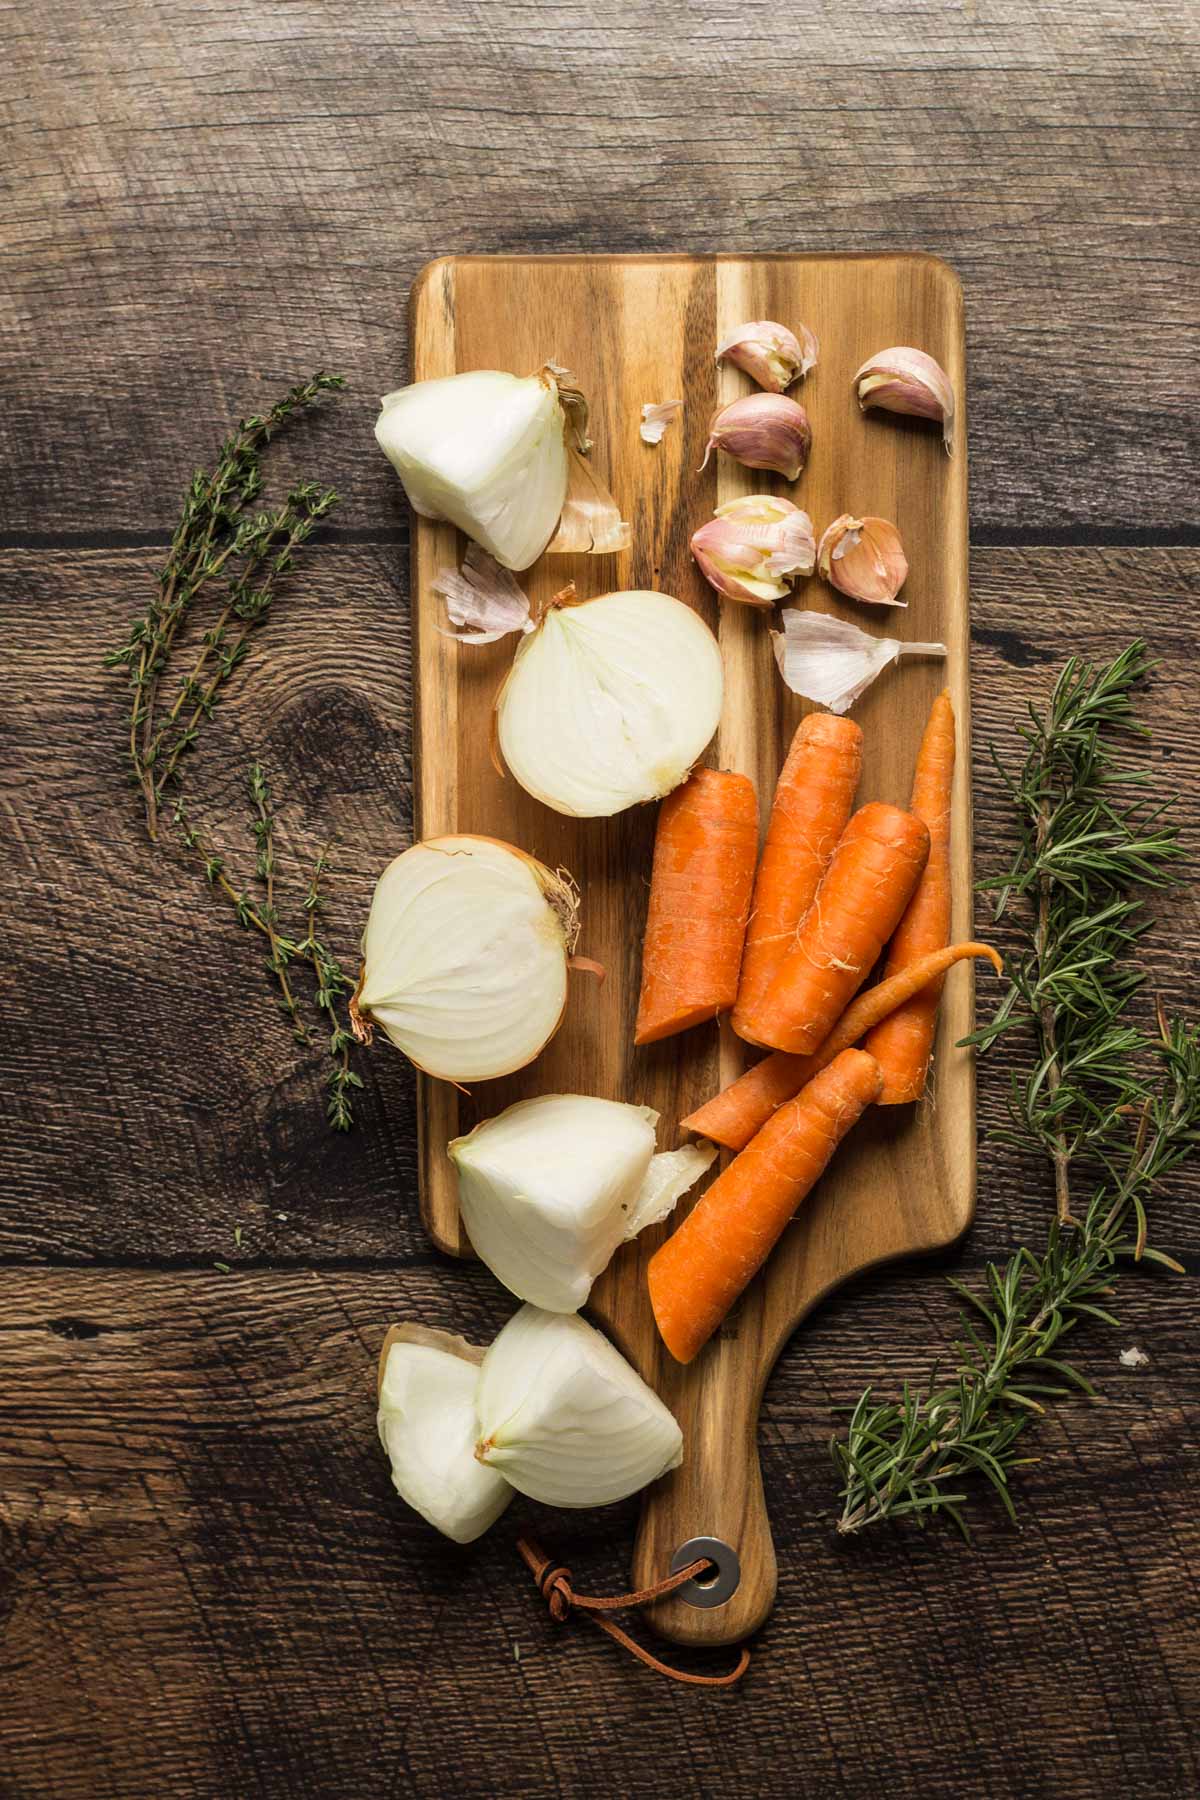 Onions, garlic, and carrots on a cutting board